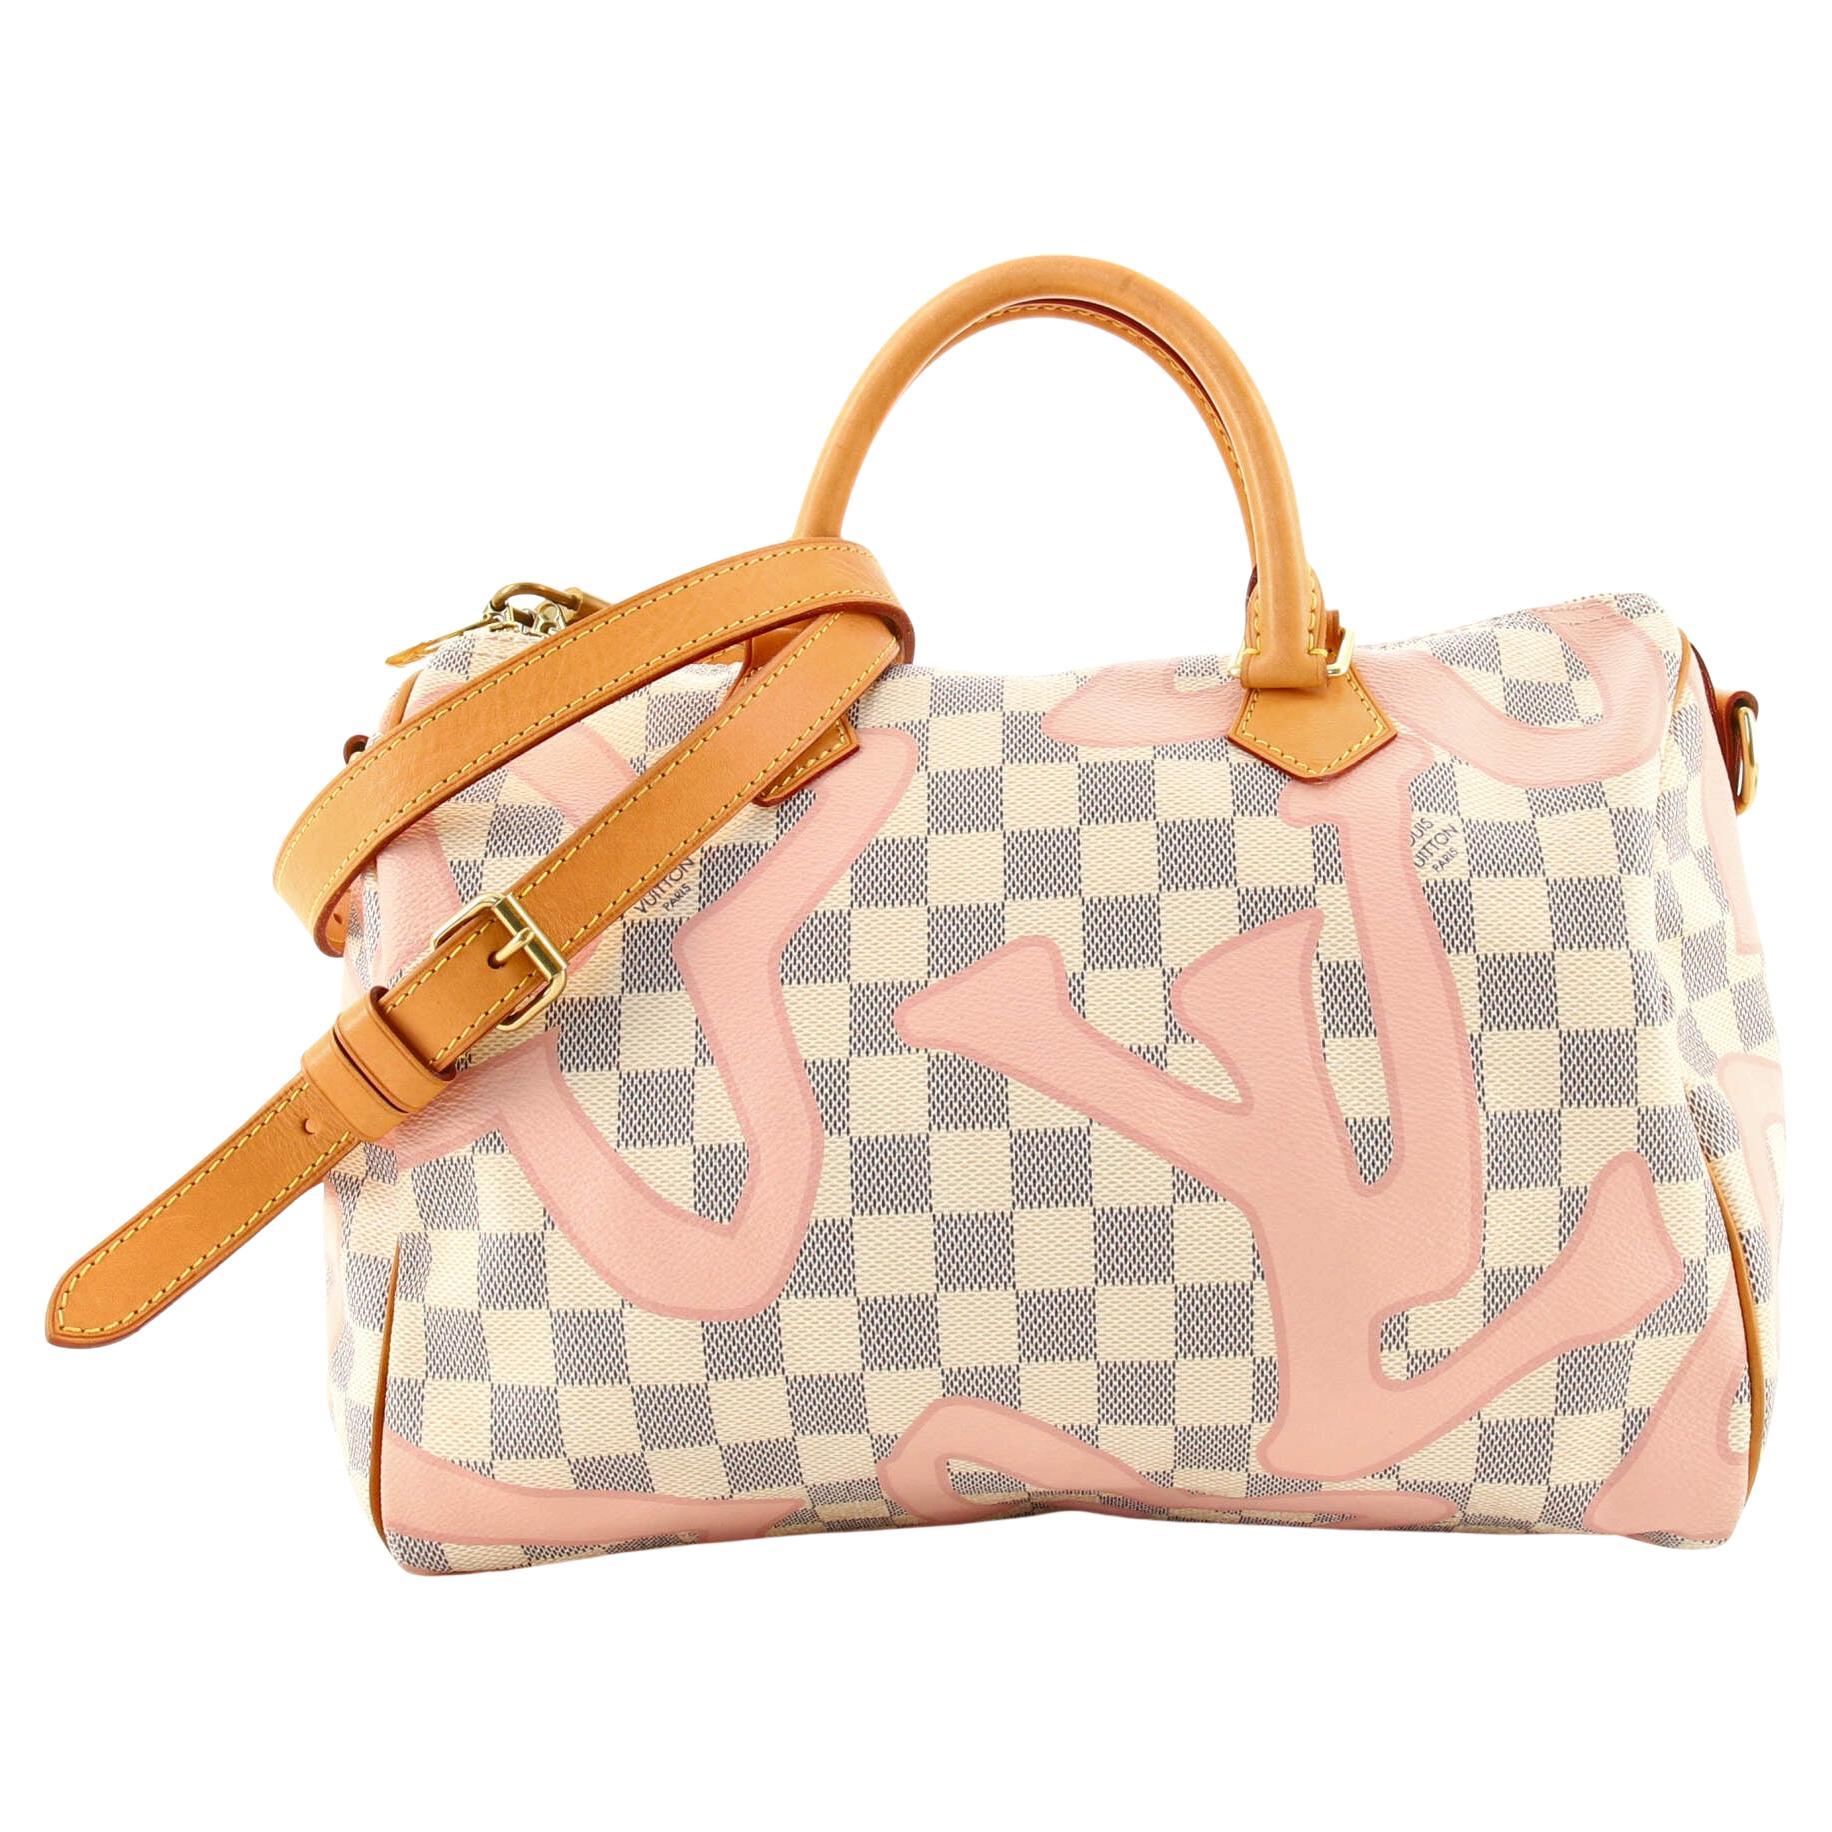 Louis Vuitton Speedy Bandouliere Bag Limited Edition Damier Tahitienne 30